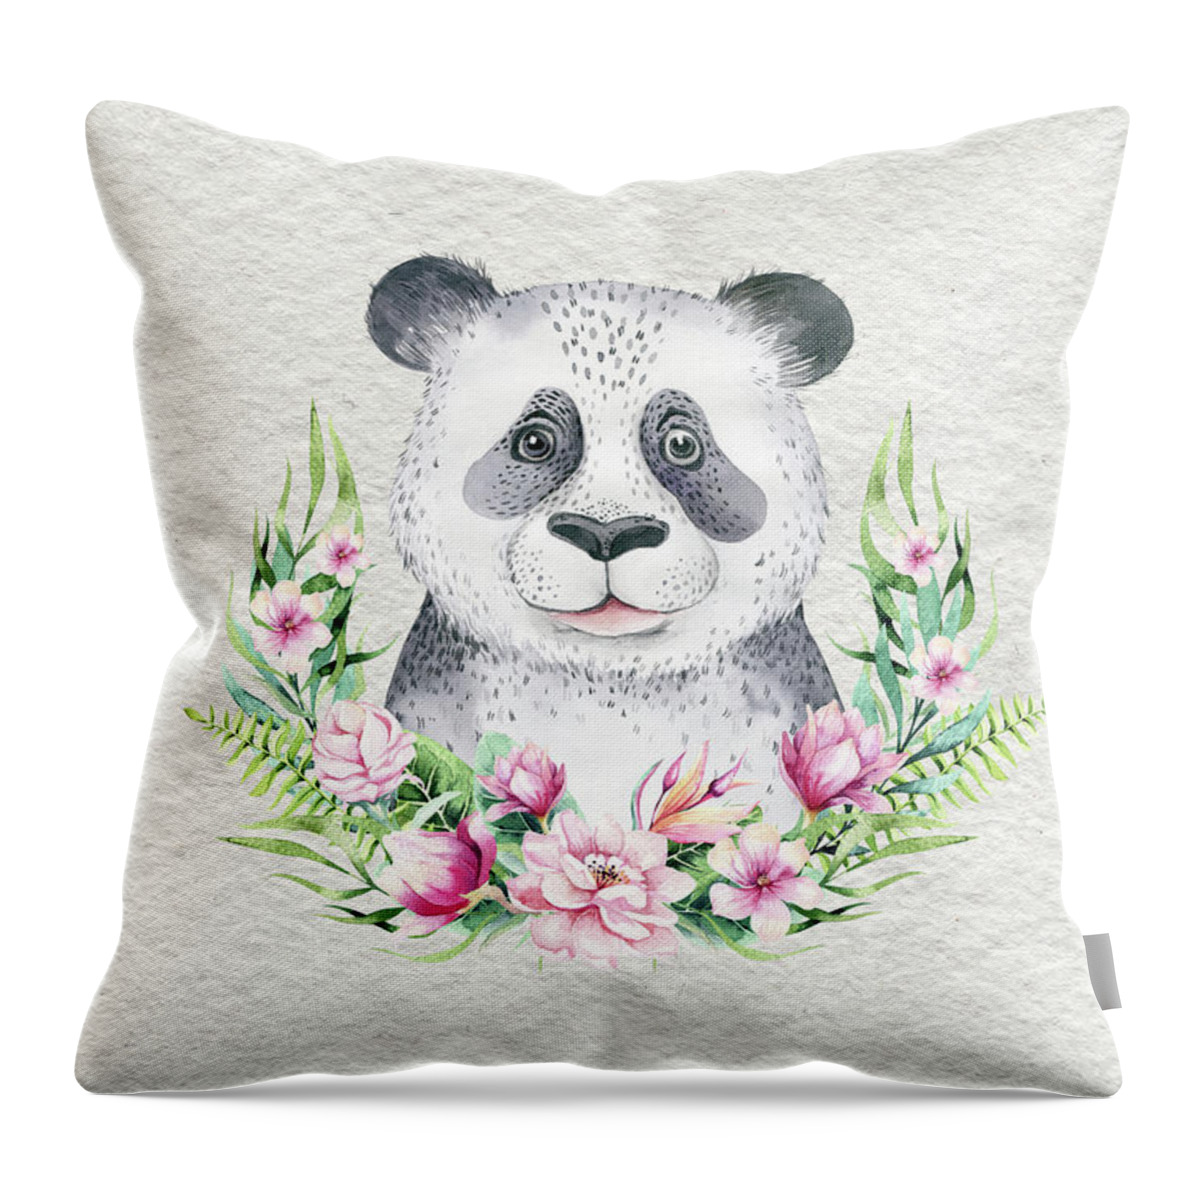 Panda Throw Pillow featuring the painting Panda Bear With Flowers by Nursery Art